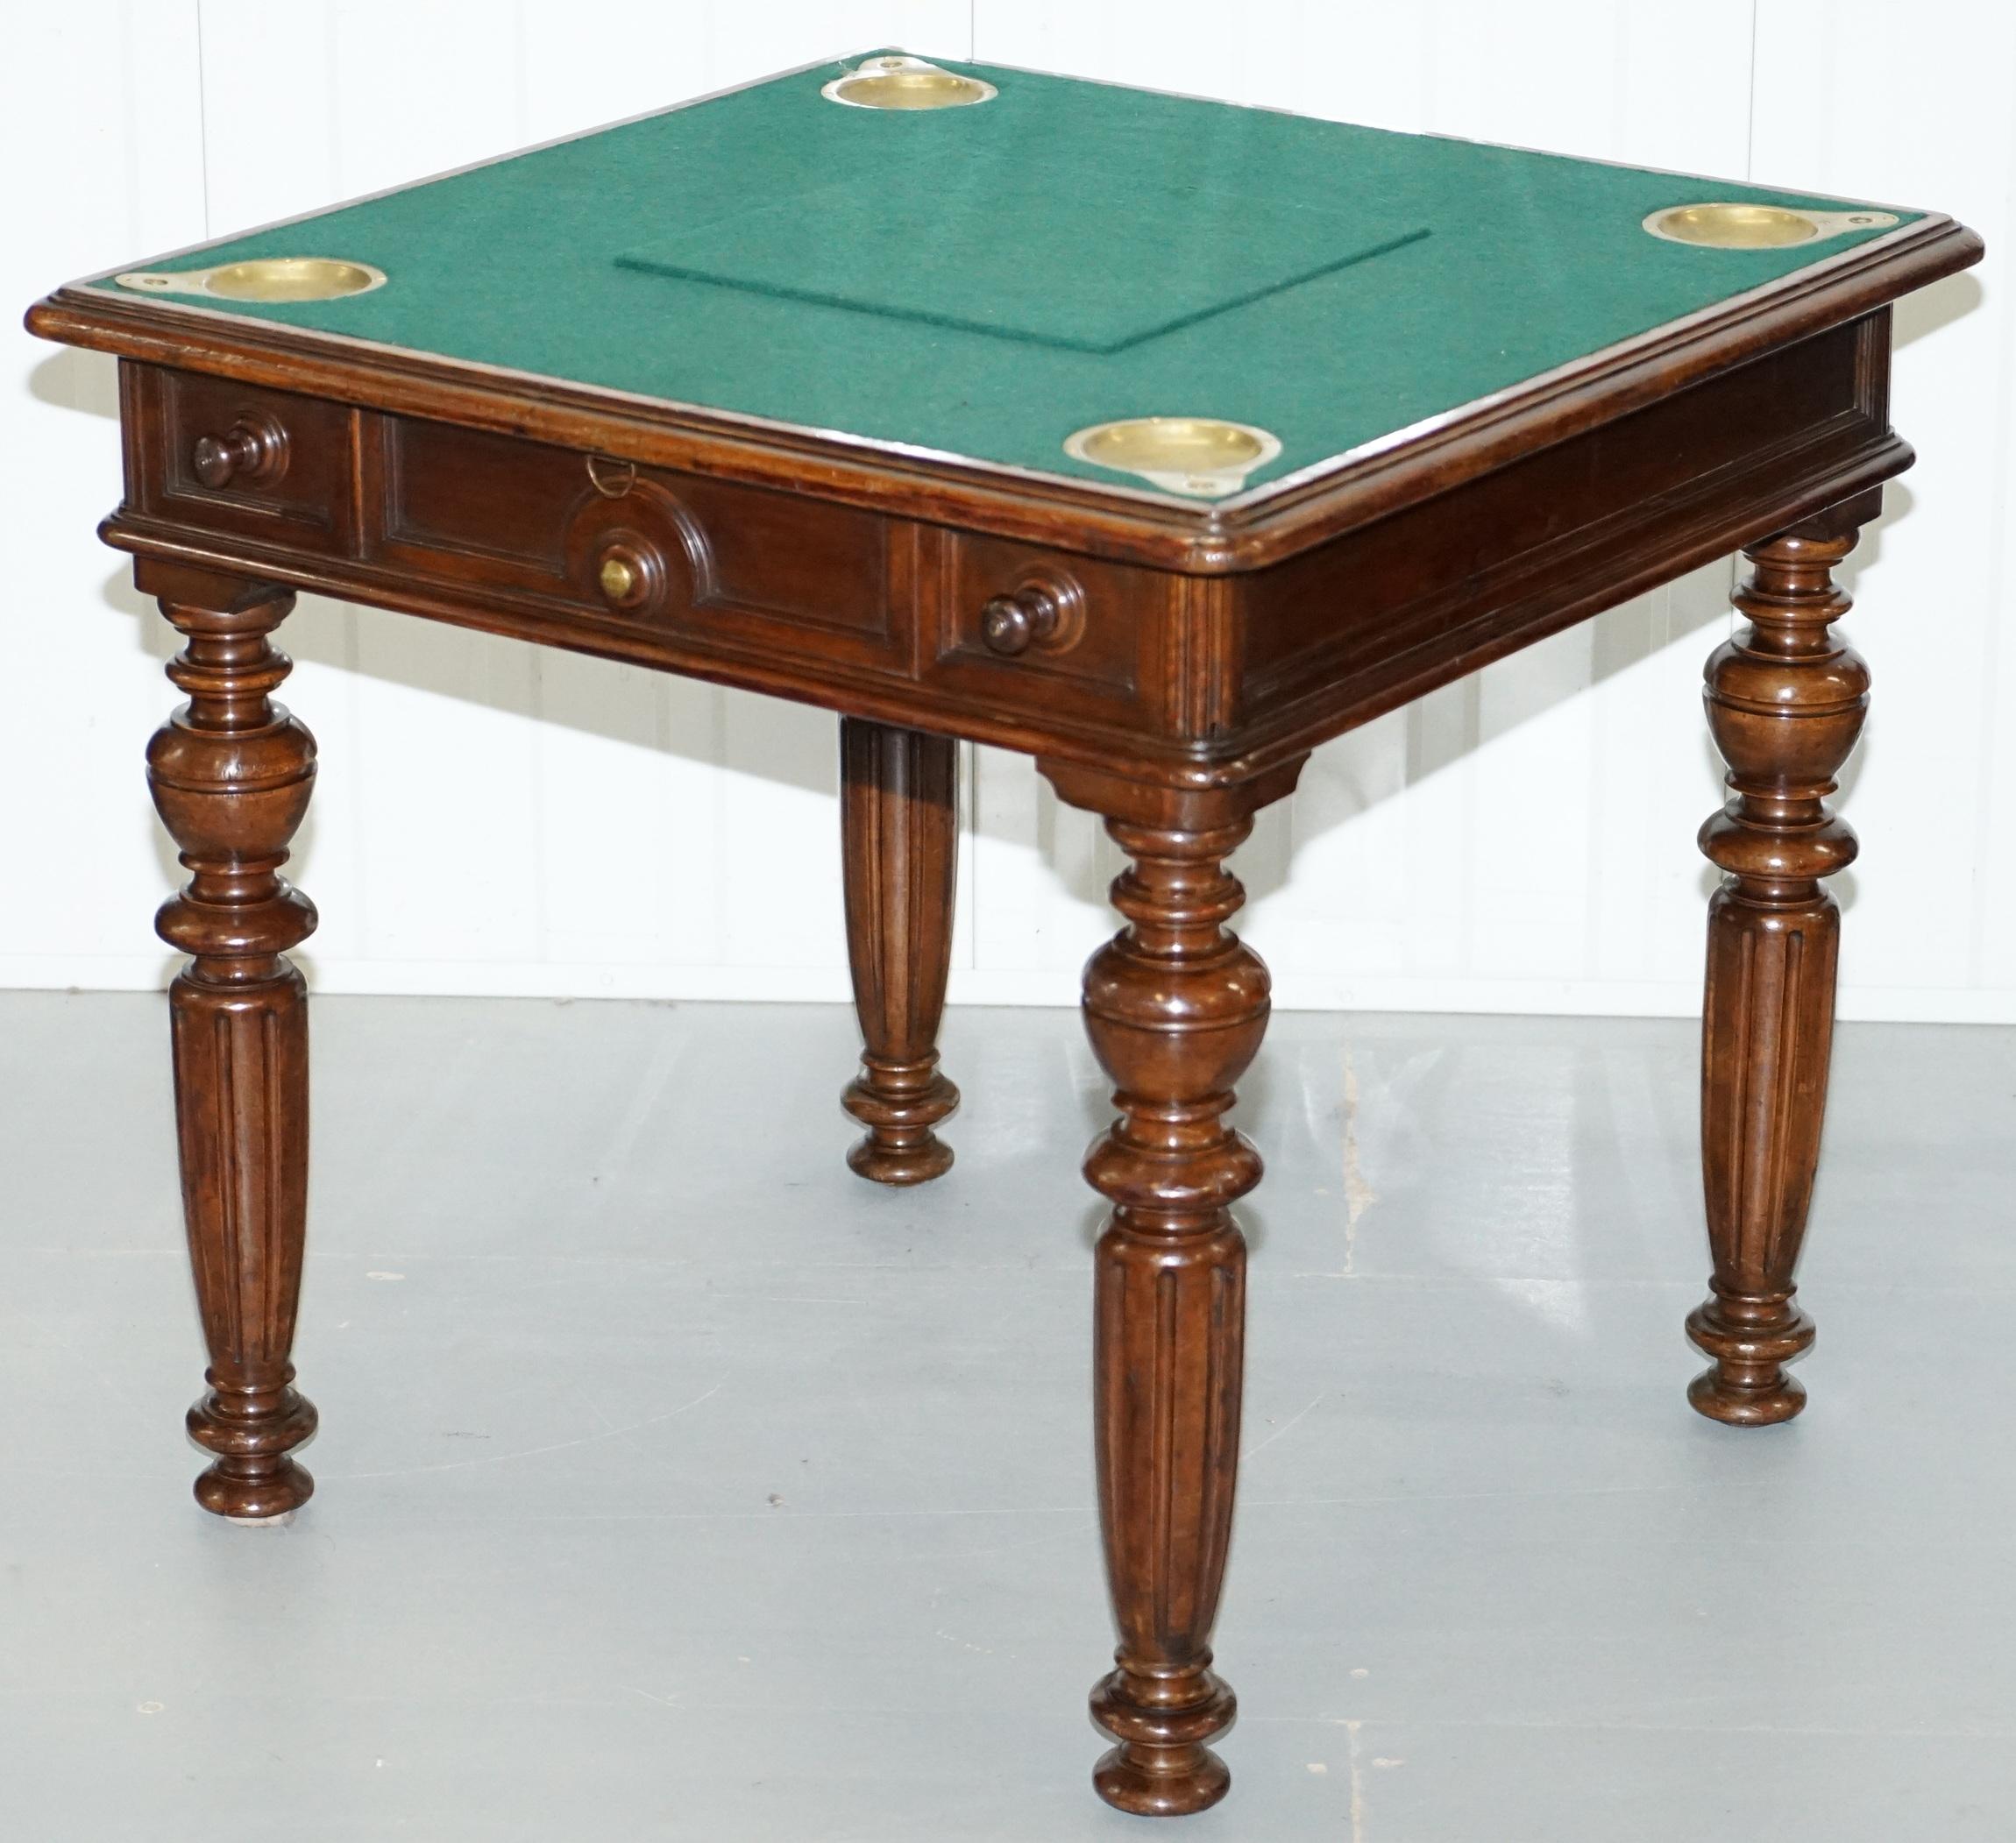 British Rare Victorian Games Table circa 1840 Drop Middle Secret Drawers and Buttons For Sale